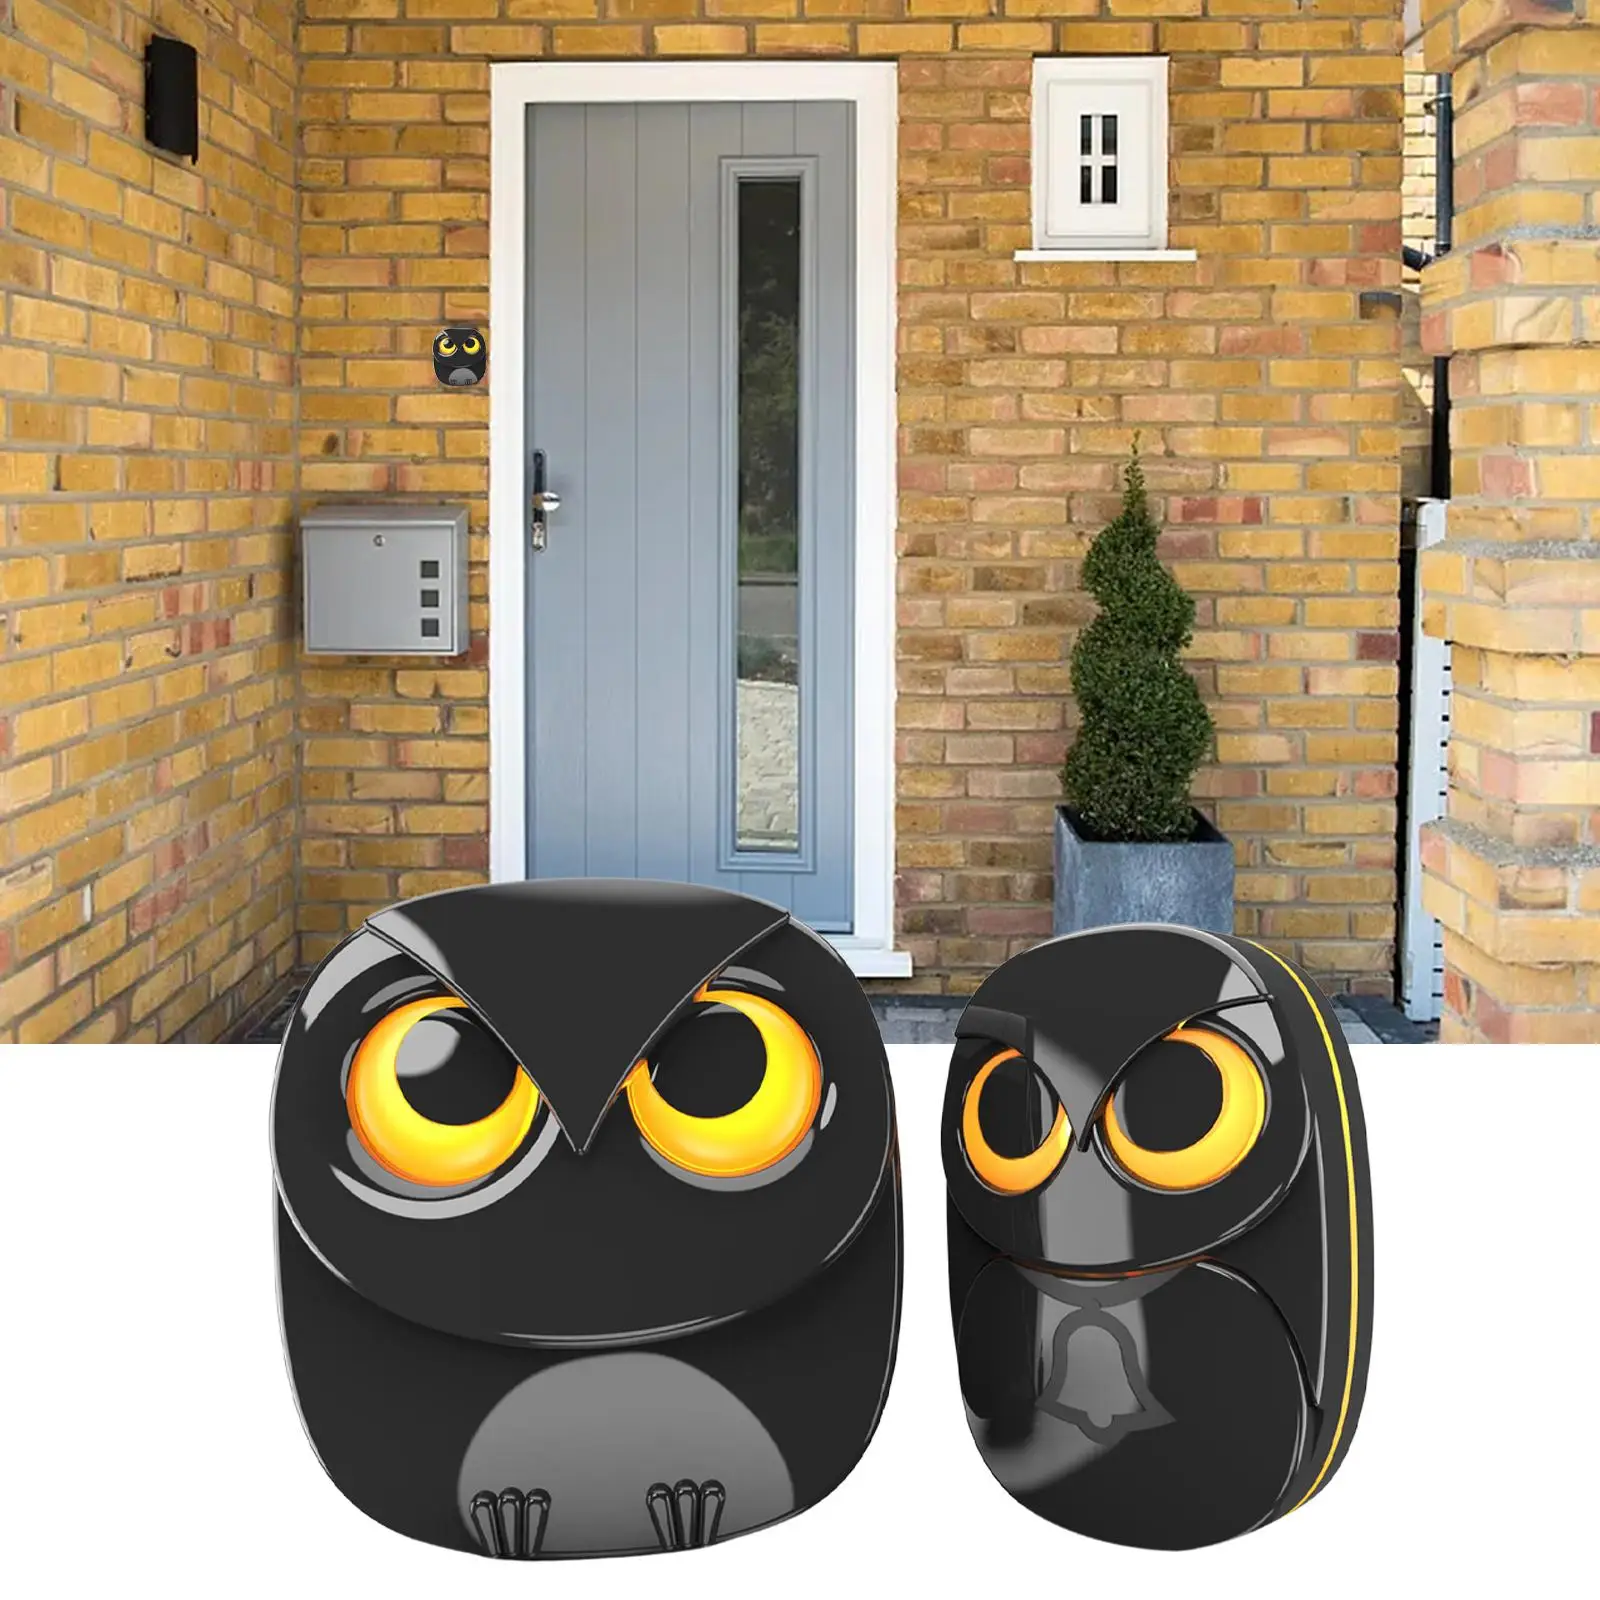 Wireless Driveway Security Alarm Multi Use Simple Using Motion Sensor and Detector for Gate Home Outside Office US Plug